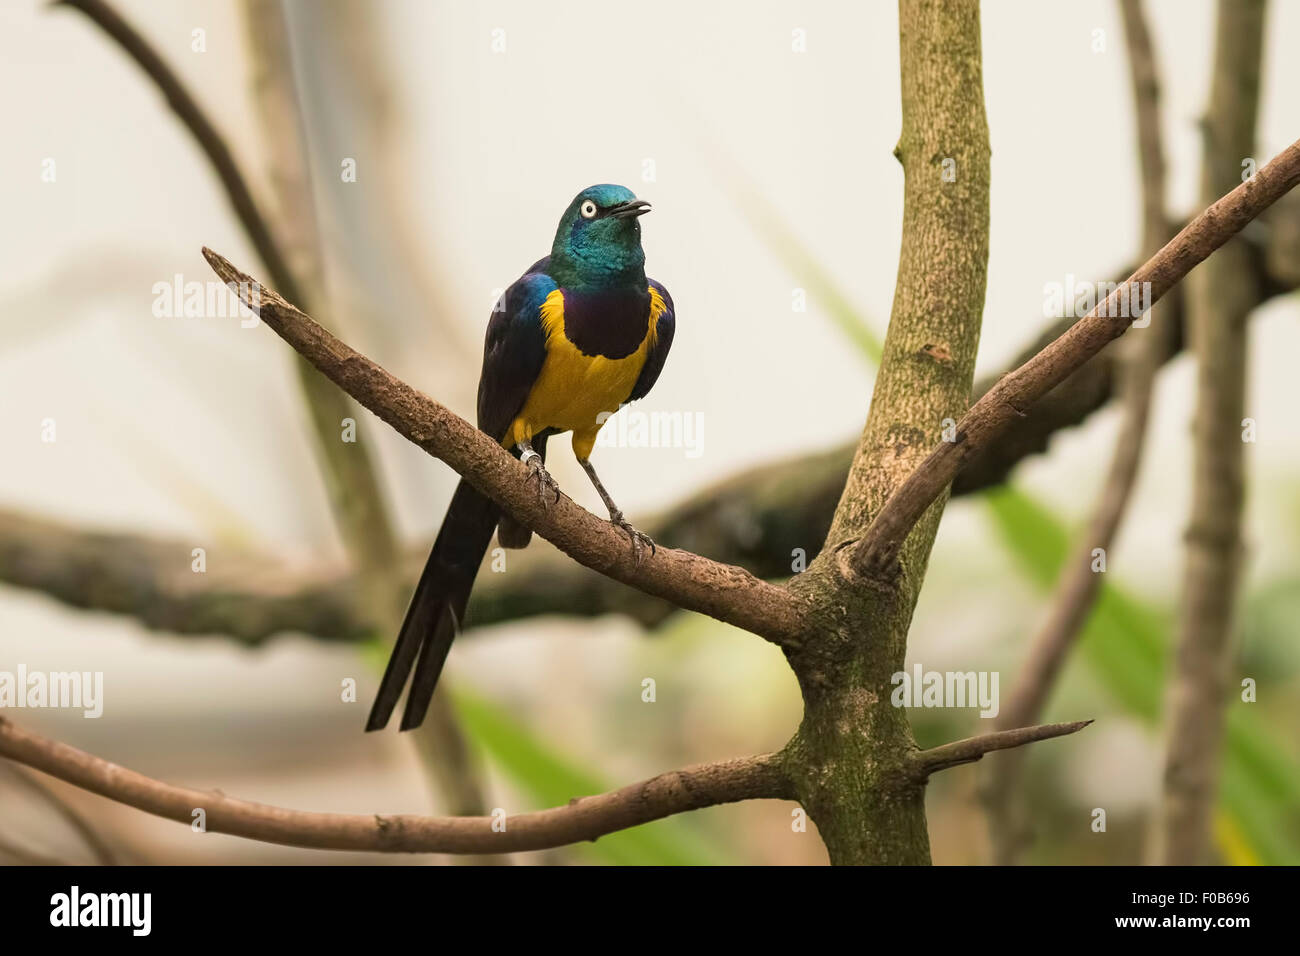 The golden-breasted starling (Lamprotornis regius), also known as royal starling. The golden-breasted starling is distributed in Stock Photo